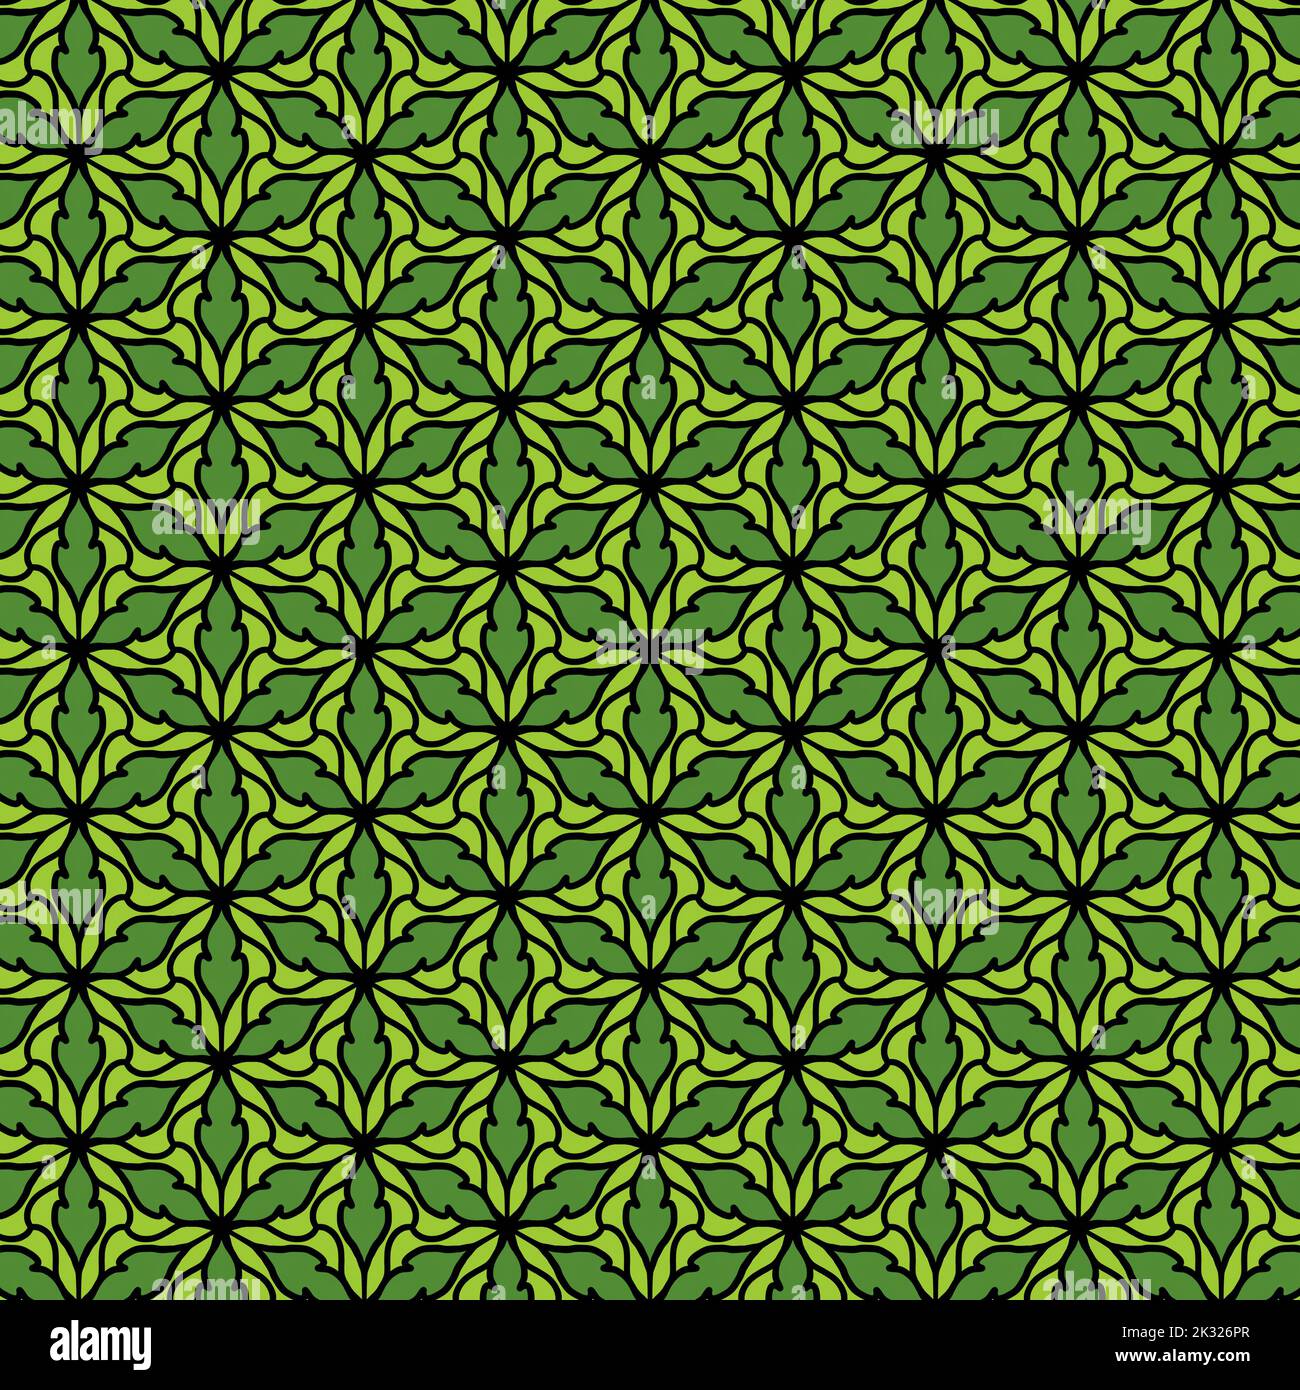 Seamless pattern of graphic leaves with Asia style arts, overall green with the black line of shape, vintage and luxury look. Stock Photo